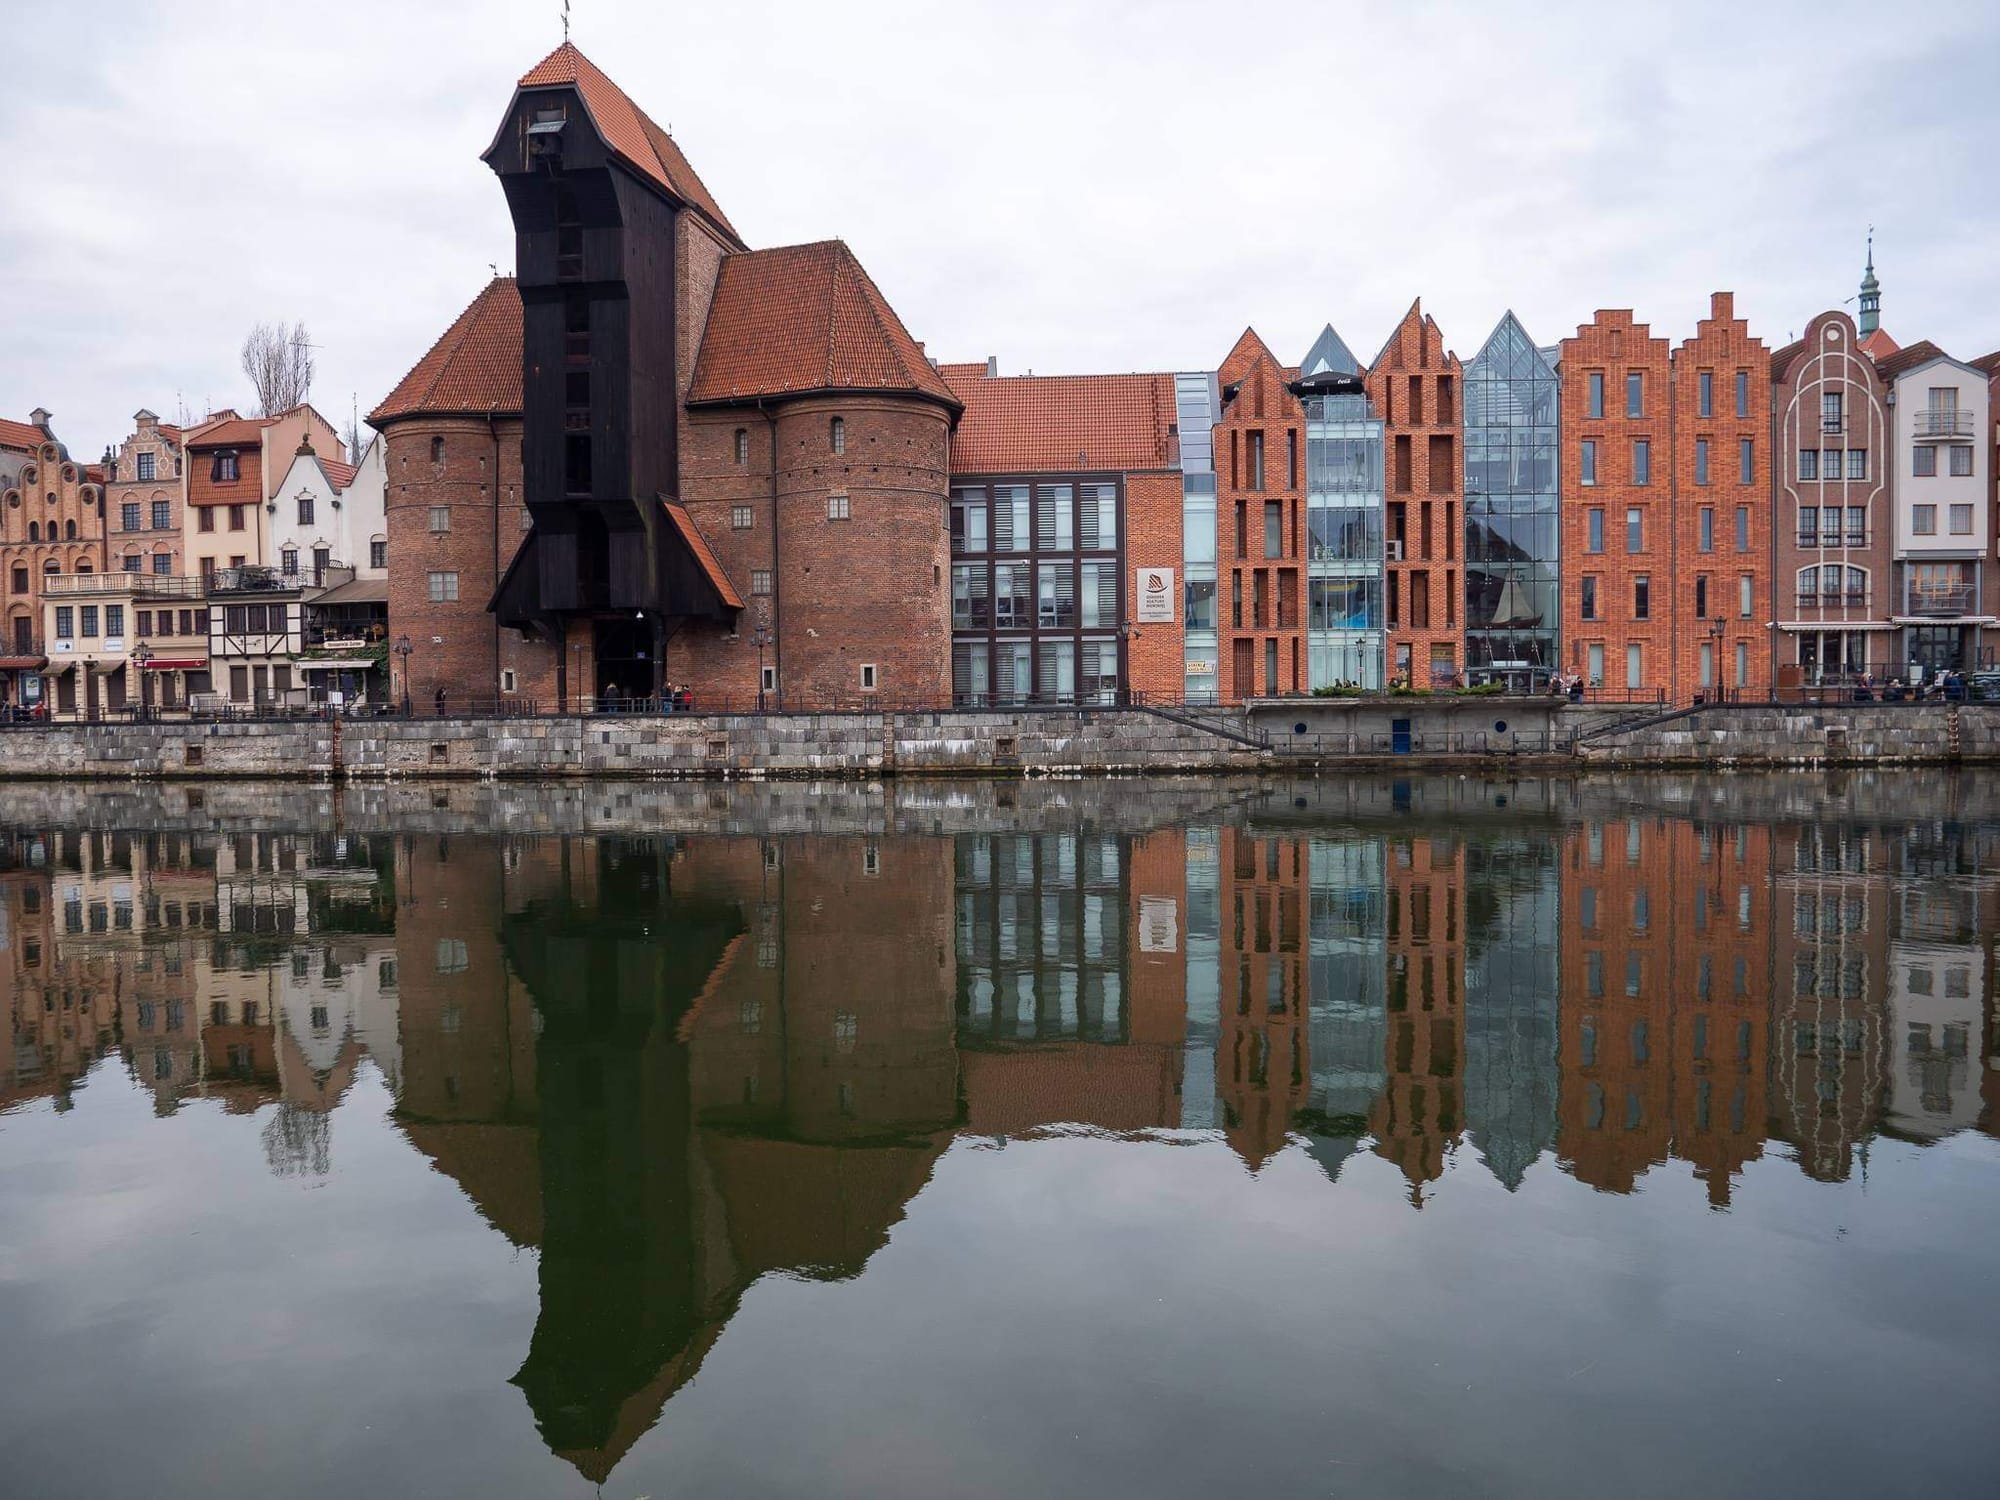 Gdansk, Poland - Copyright @ Thomas Andy Branson/ Branson studios. All rights reserved -